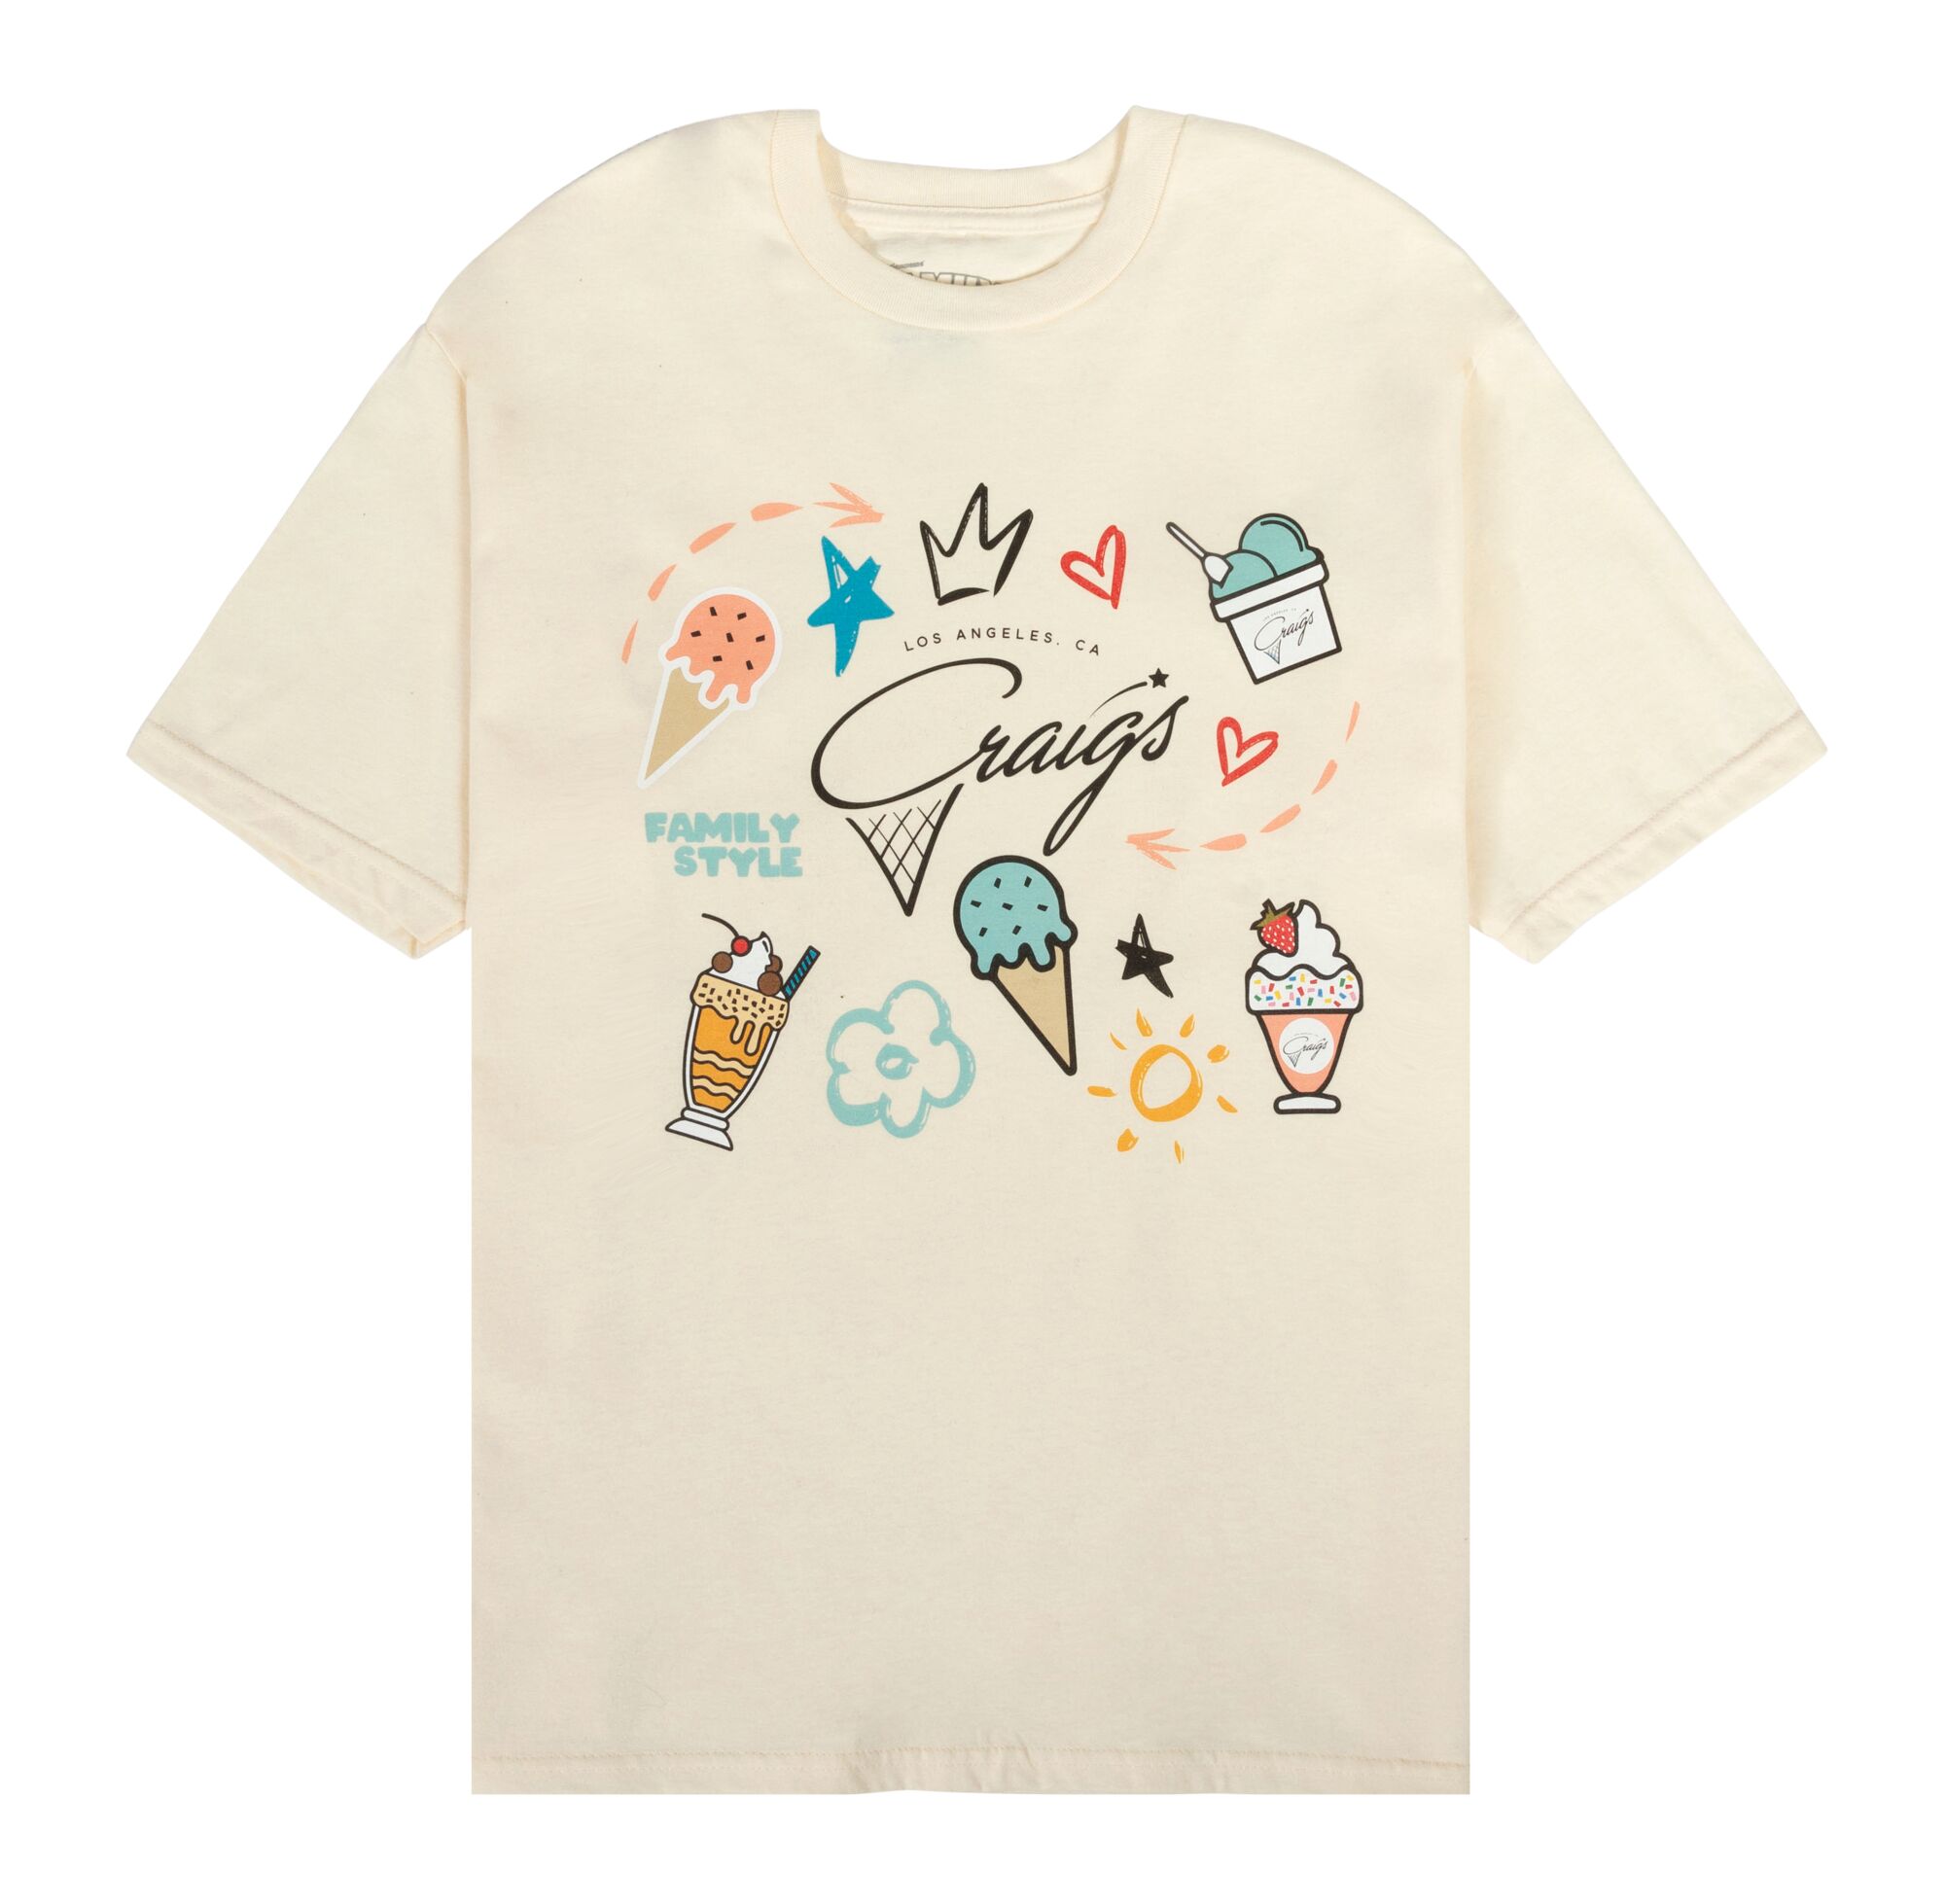 Whimsical cream colored t-shirt with ice cream designs